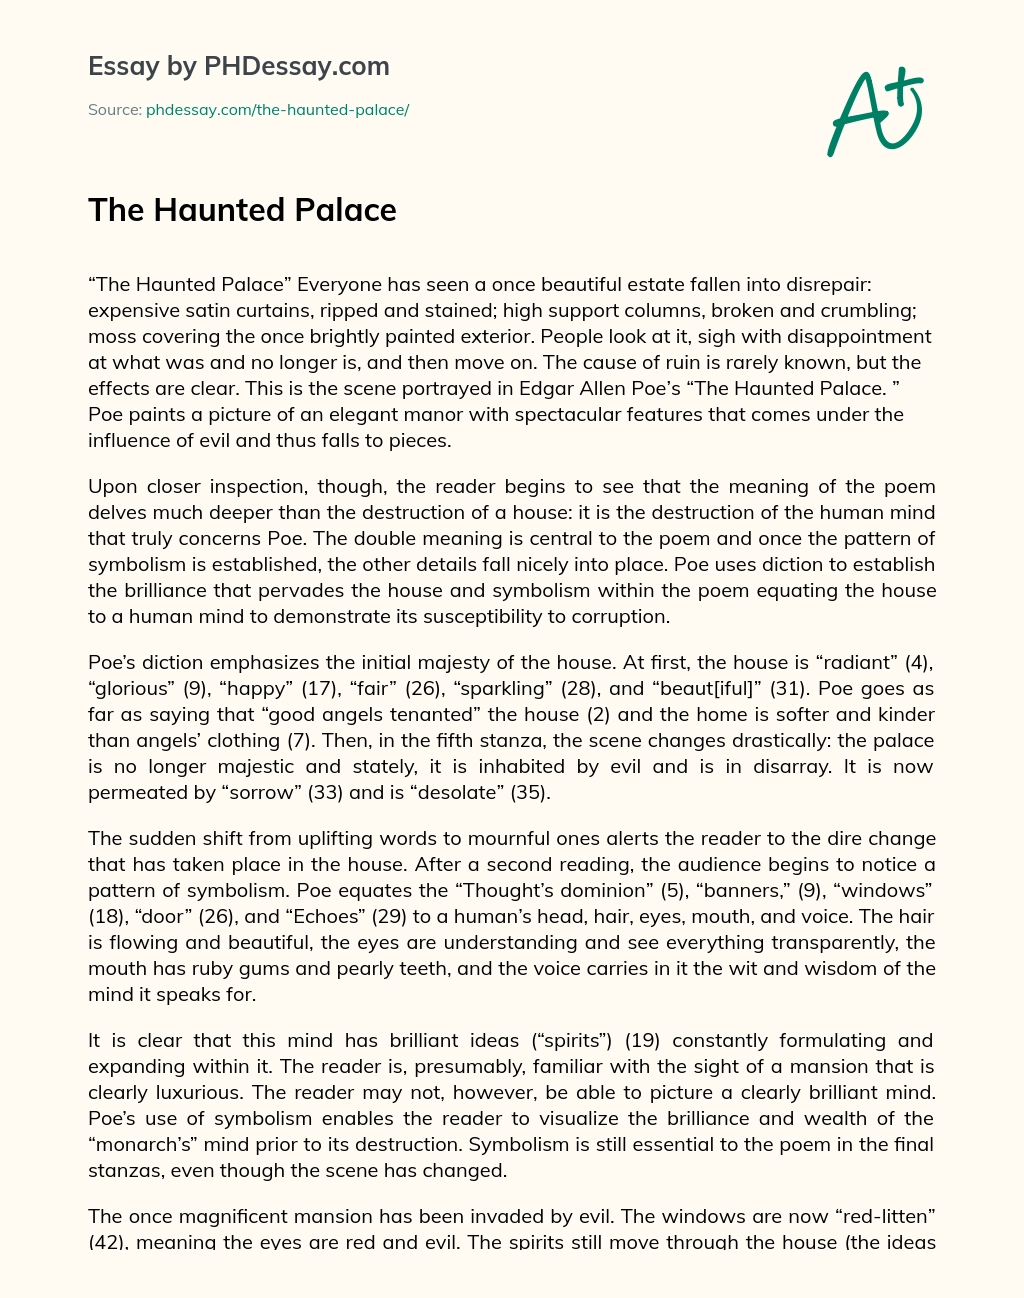 The Haunted Palace essay